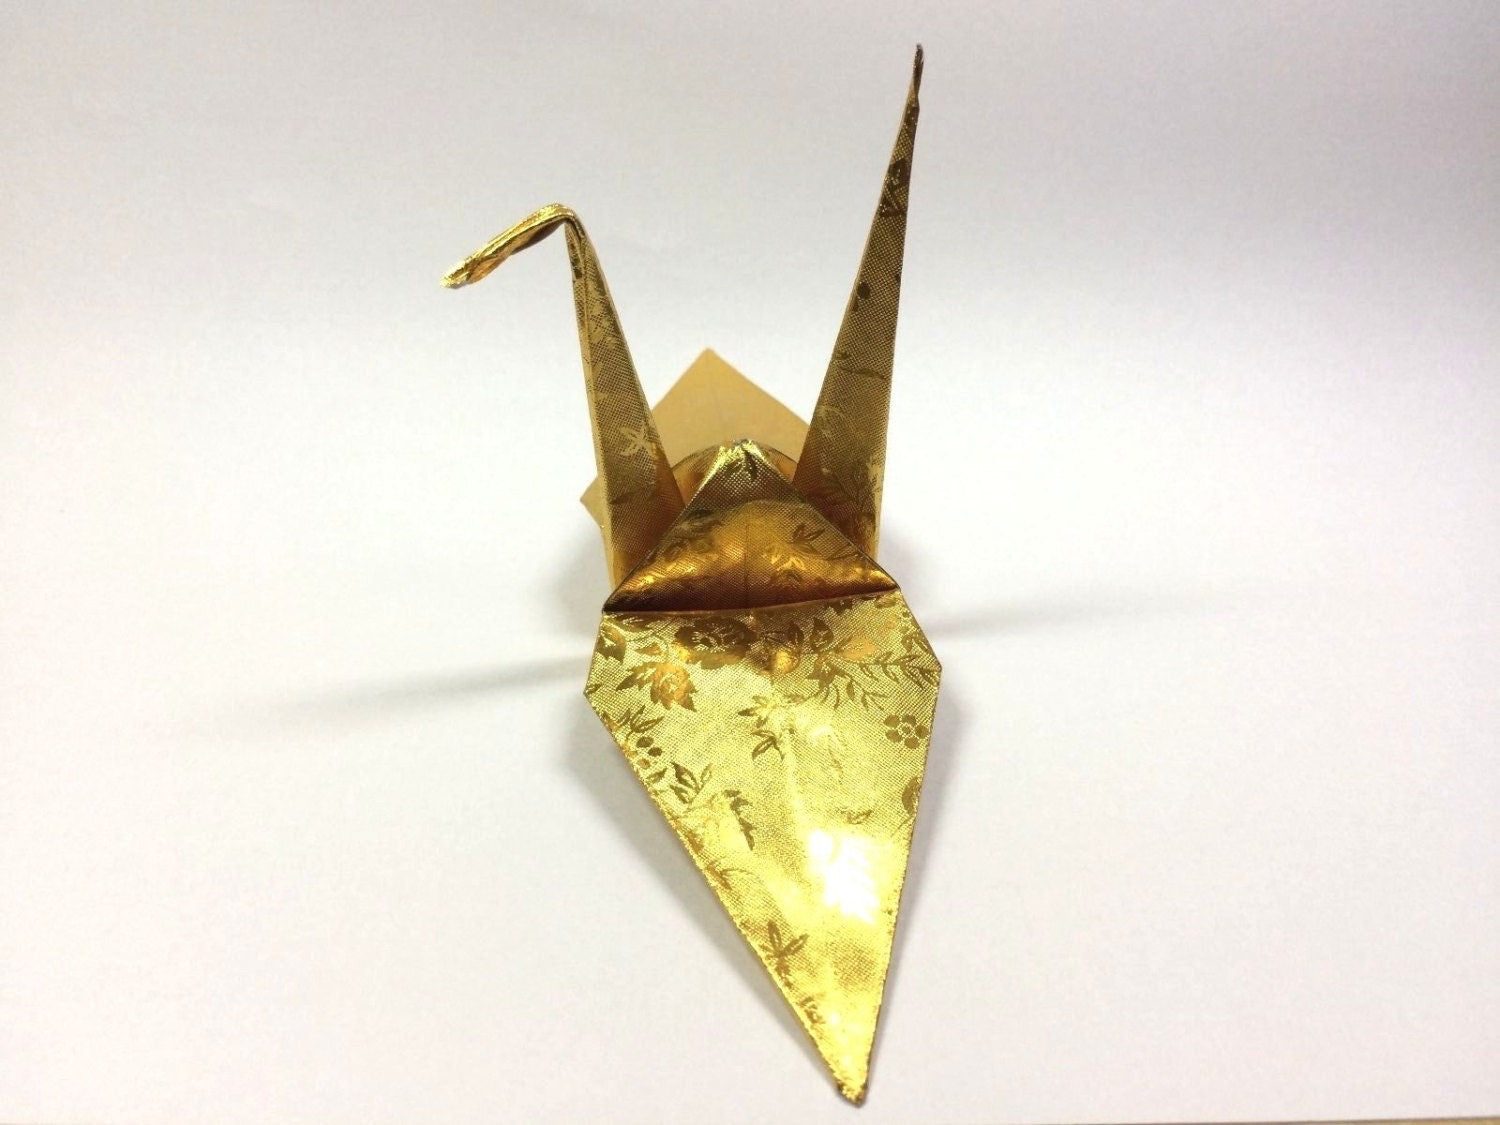 100 Origami Paper Crane Foil Gold 15 cm (6 inches) Large Bird with Pattern for Wedding Decor, Anniversary Gift, Backdrop